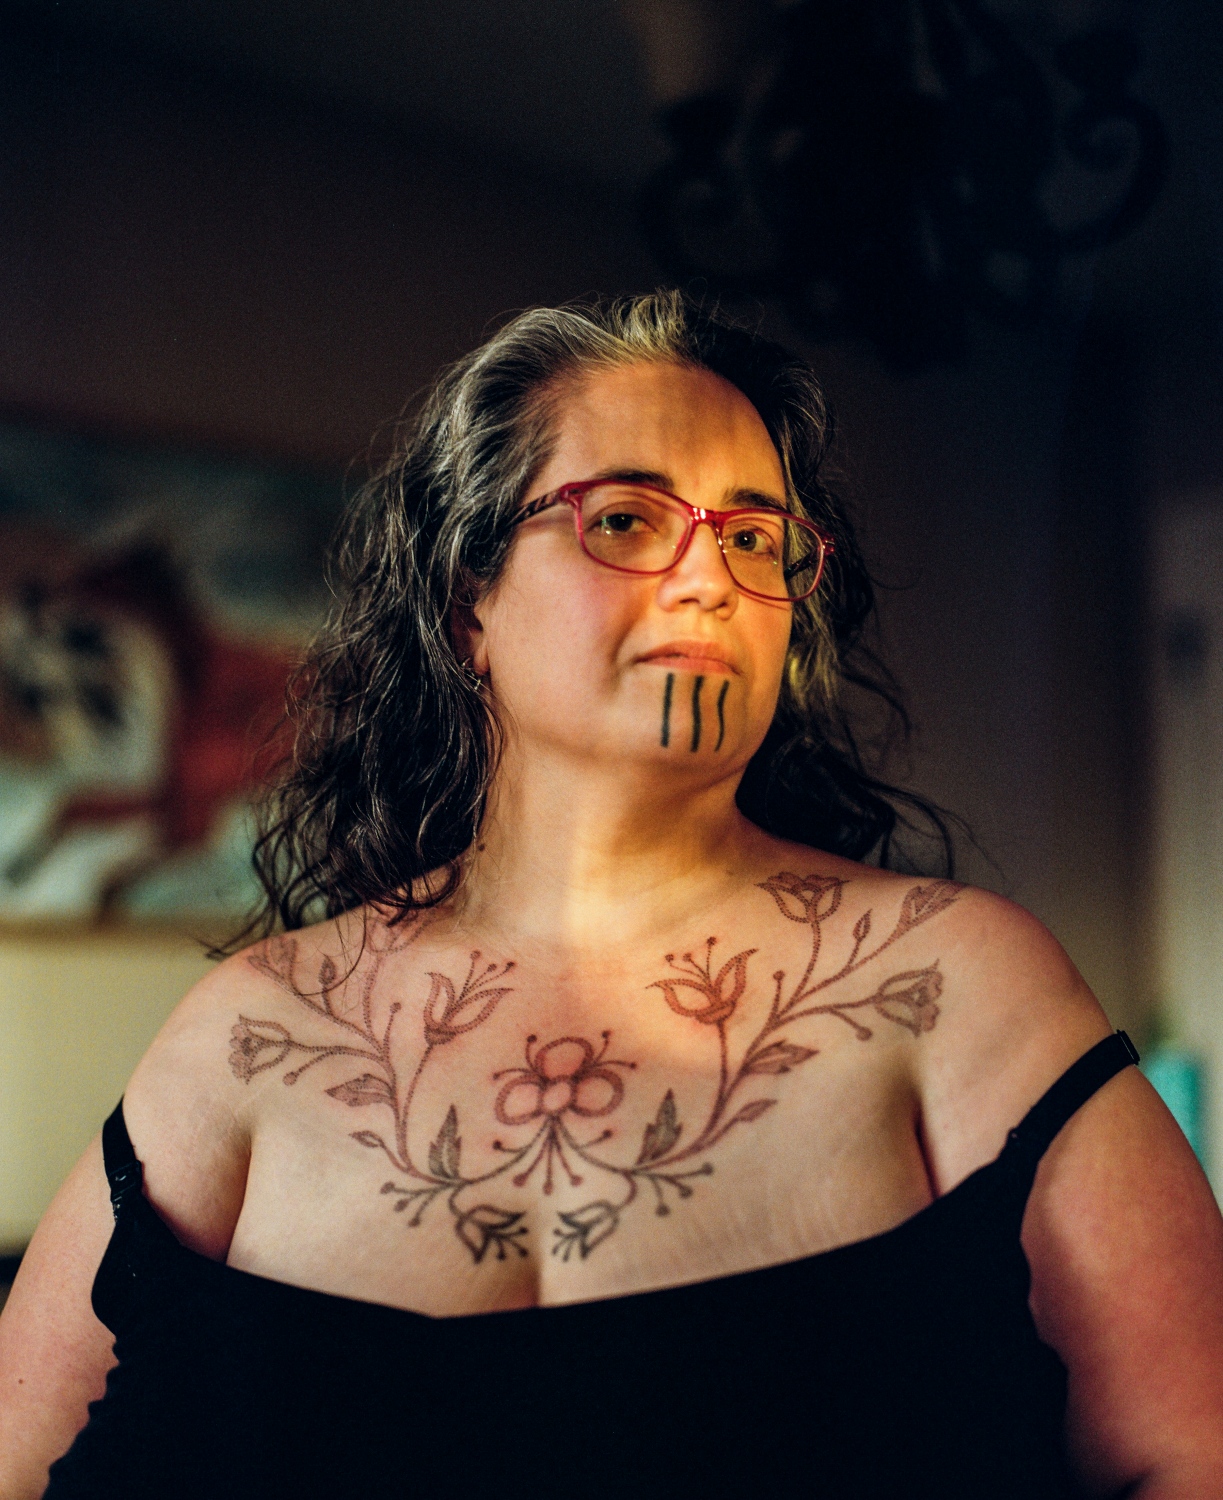  Grete Chythlook 42, in Sarah Whalen-Lunn&#39;s home in Anchorage, Alaska, after having a chest piece inspired by traditional beadwork done by Whalen-Lunn. Whalen-Lunn had also done Chythlook&#39;s chin tattoo. For Chythlook, that tattoo is both a tangible and also a deeply spiritual thing. She says that before she knew that chin tattoos were a part of her heritage, she was already dreaming of them.&nbsp; &ldquo;I started dreaming about chin tattoos when I was in my late teens and early twenties, and at that time, I didn&rsquo;t know anybody who had a chin tattoo, whether Inuit, Gwich&#39;in or any other group. I didn&rsquo;t know anybody personally. I didn&rsquo;t know that the Gwich&#39;in had this tradition&mdash;I just didn&rsquo;t know about it,&quot; she says. &nbsp;When she first saw a woman with a chin tattoo, she says she was too scared and shy to ask her about it. But then, women began talking about Inuit tattoos and a friend asked her to be there in the room with her while she got hers. &ldquo;Being in the room with her while she was getting these marks was so powerful, I couldn&rsquo;t process it&mdash;it was just so powerful. I came home and I told my husband, &lsquo;this is a part of me. This is real. This is something I can&rsquo;t deny anymore.&rsquo;&rdquo;&nbsp; She says that her decision to get the tattoo is partly tied to its visibility, and that where once this was just a regular part of culture, now, as a revitalization, it&rsquo;s a response to colonization and it&rsquo;s lasting effects. &ldquo;Choosing not to pass was a big factor for me because there&rsquo;s too many people still who are ashamed to be native because of stereotypes and everything else, and I was never ashamed of who I was or where I was from,&rdquo; says Chythlook. &ldquo;And that was a big one for me--choosing not to pass--and making sure that when I walk into a room not only do people know who I am but they know how I think, what I feel&mdash;because this says more than just &lsquo;oh, she&rsquo;s native.&rsquo;&rdquo; 